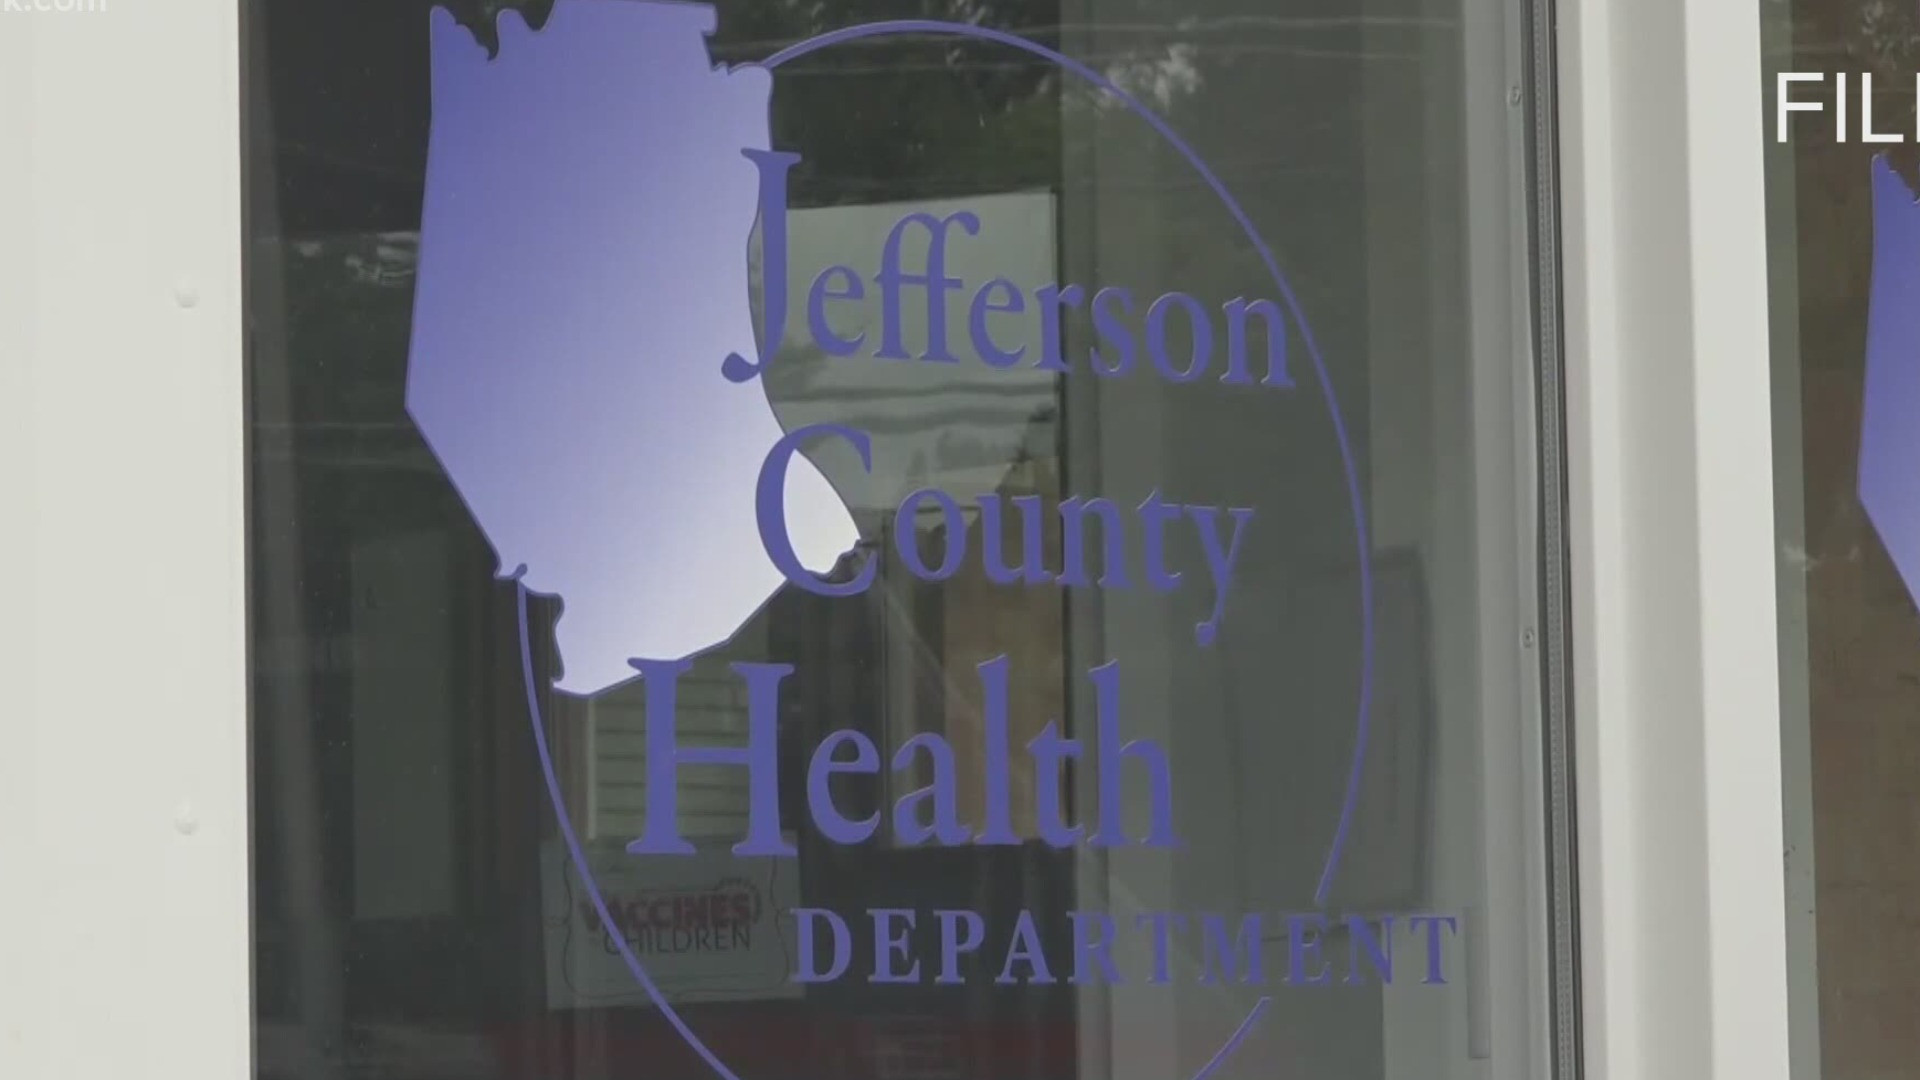 The health department director said the mandate was a small, but necessary change that some businesses asked for